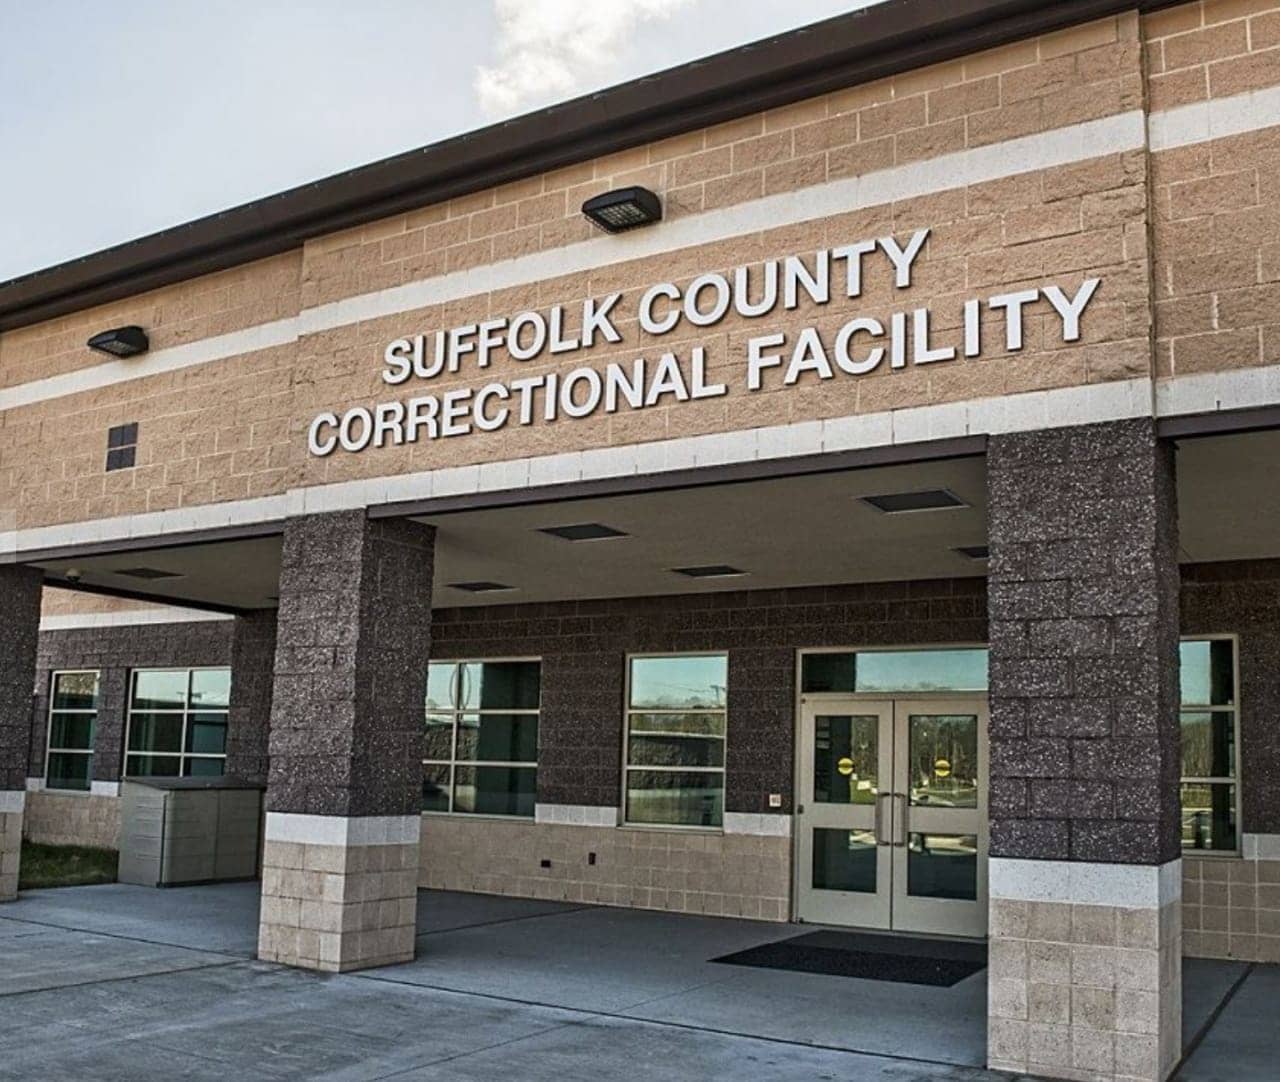 An inmate at Suffolk County Jail is facing new charges